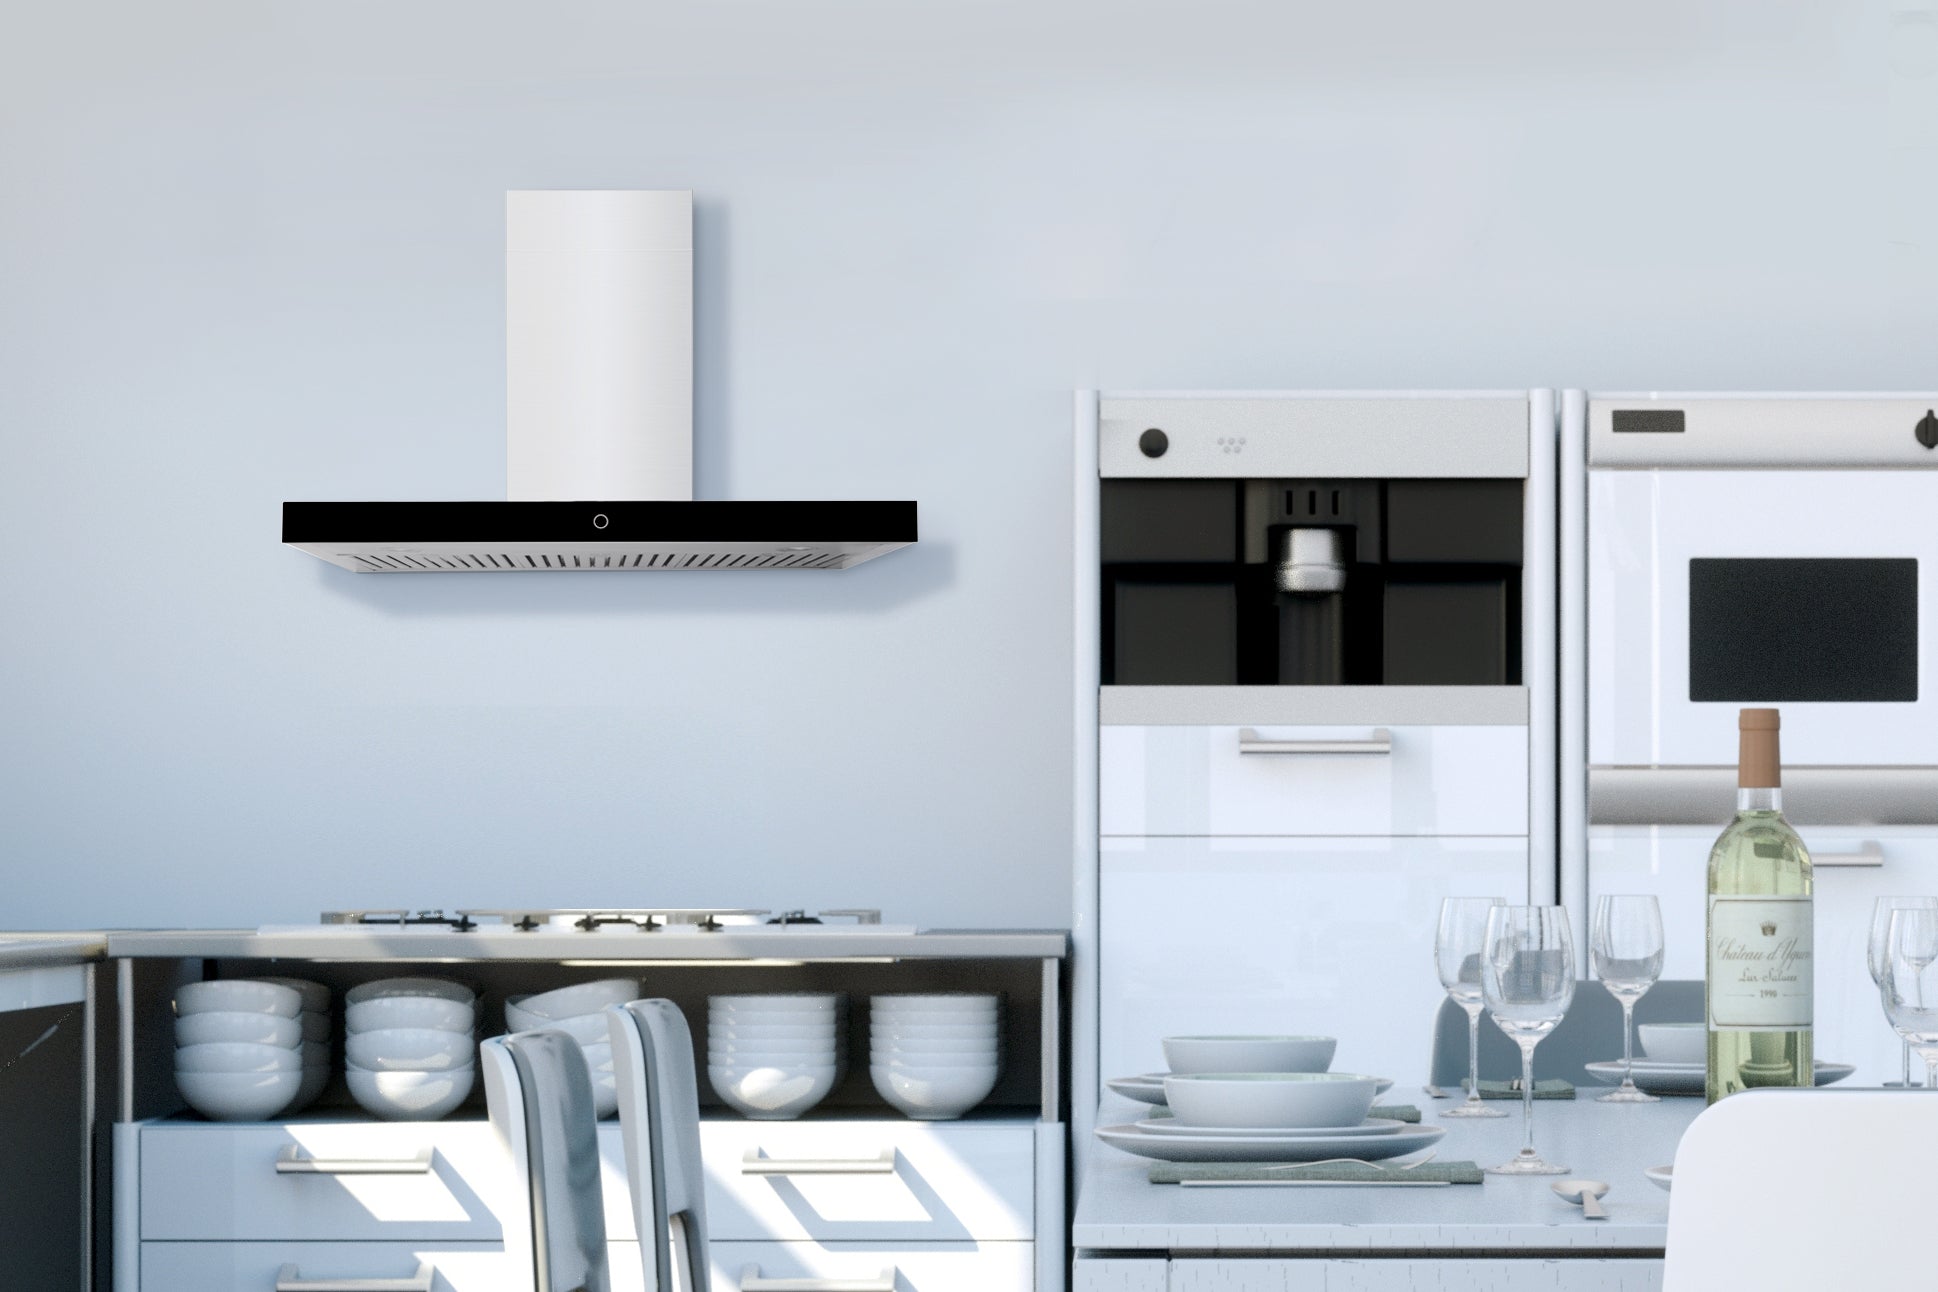 Ducted vs ductless range hood: Which Is Right for Your Kitchen?